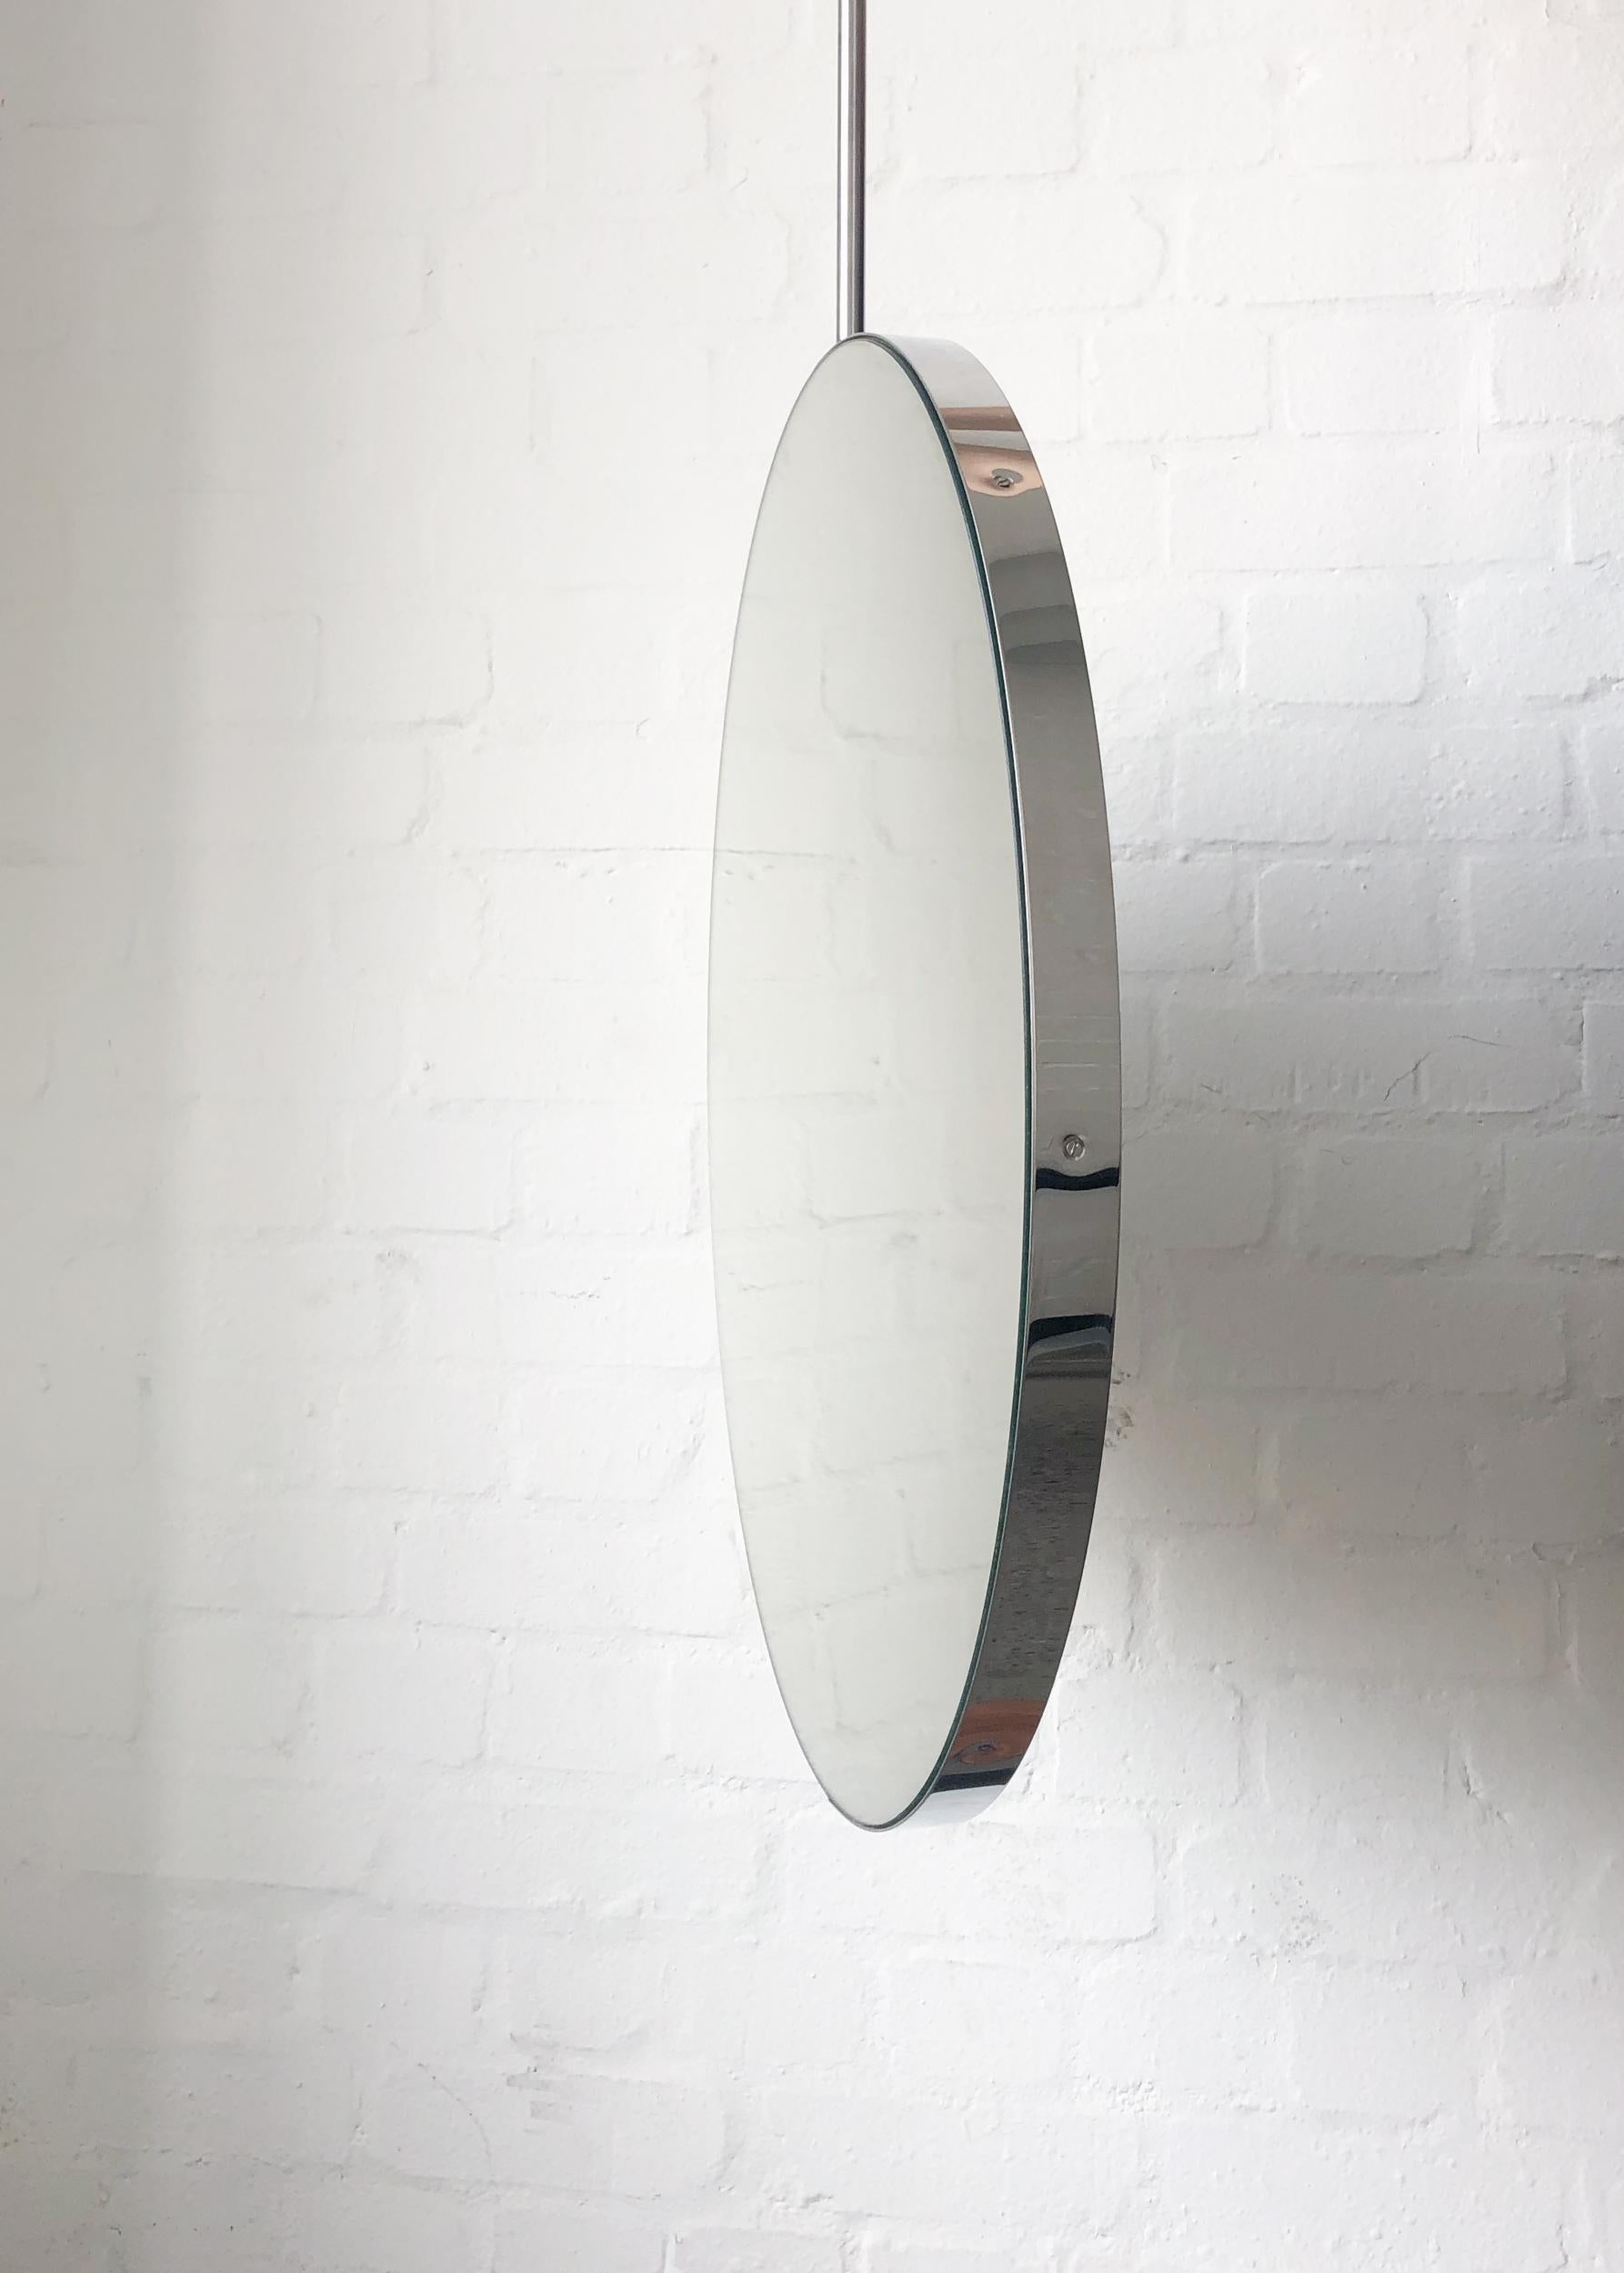 Art Deco Round Orbis Ceiling Suspended Mirror with Handcrafted Stainless Steel Frame For Sale